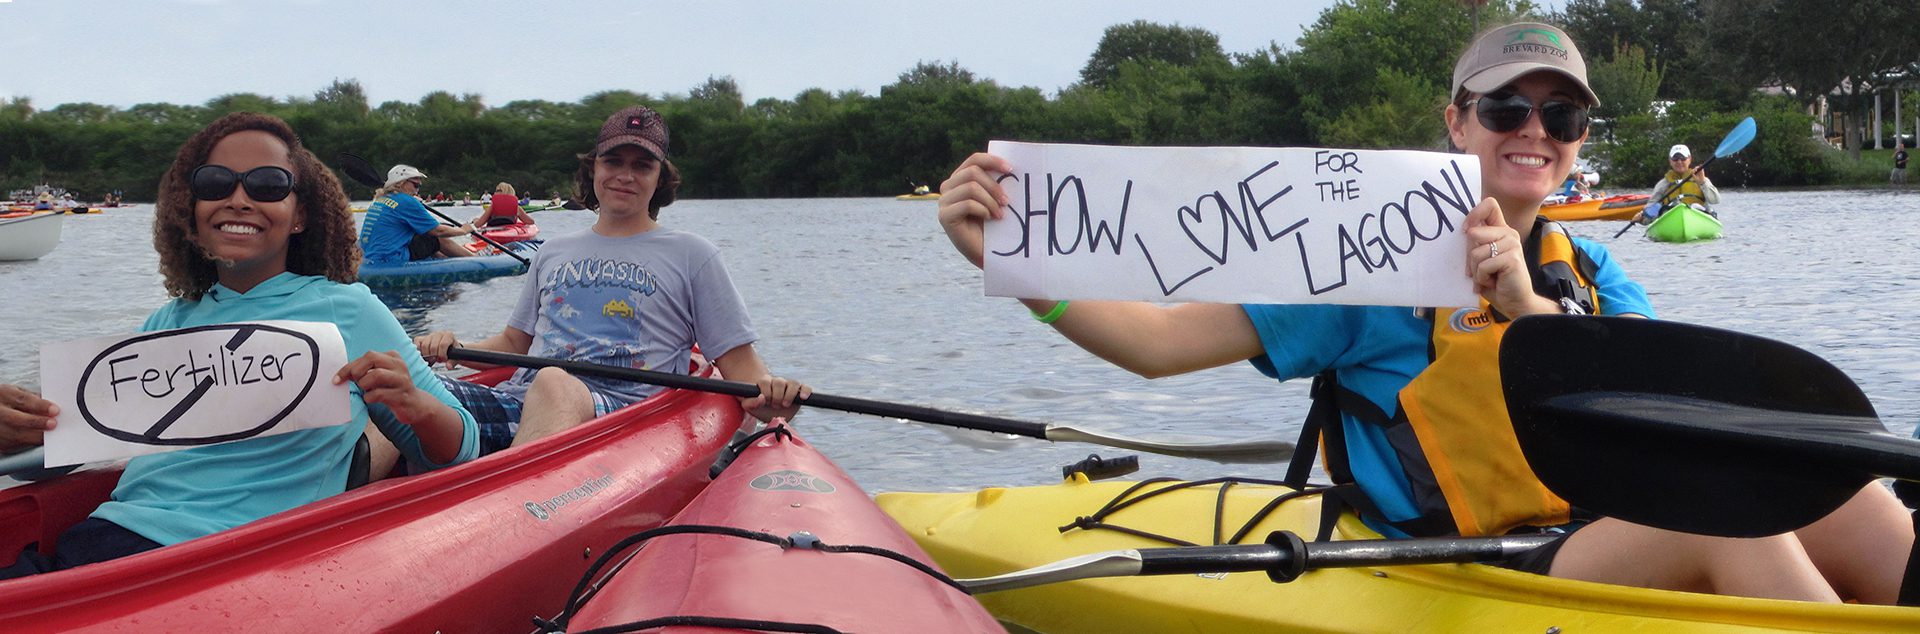 Kayakers, one of them holding up a "Show Love to the Lagoon" sign. Another holding a "No fertilizer" sign. They're smiling, assuming they're happy.